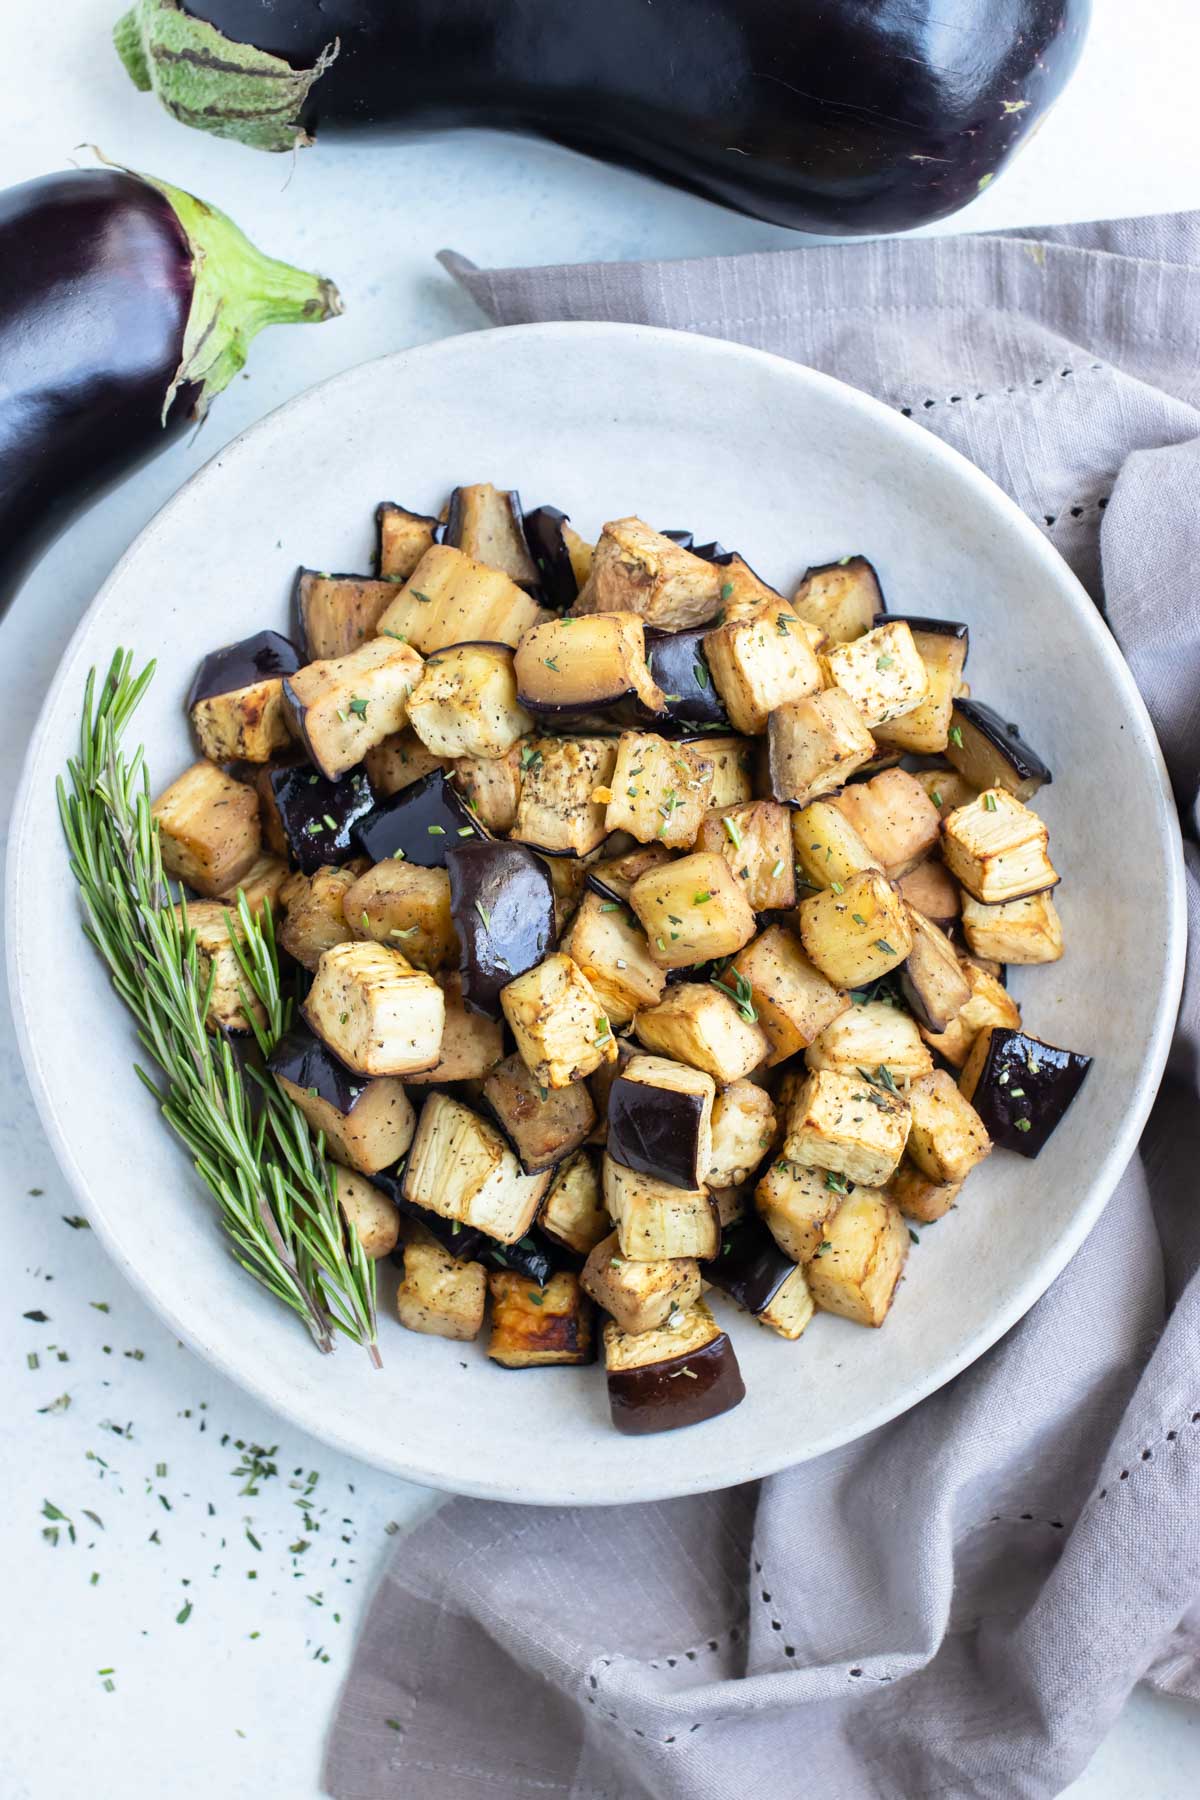 A bowl of roasted eggplant is shown for a healthy side dish.